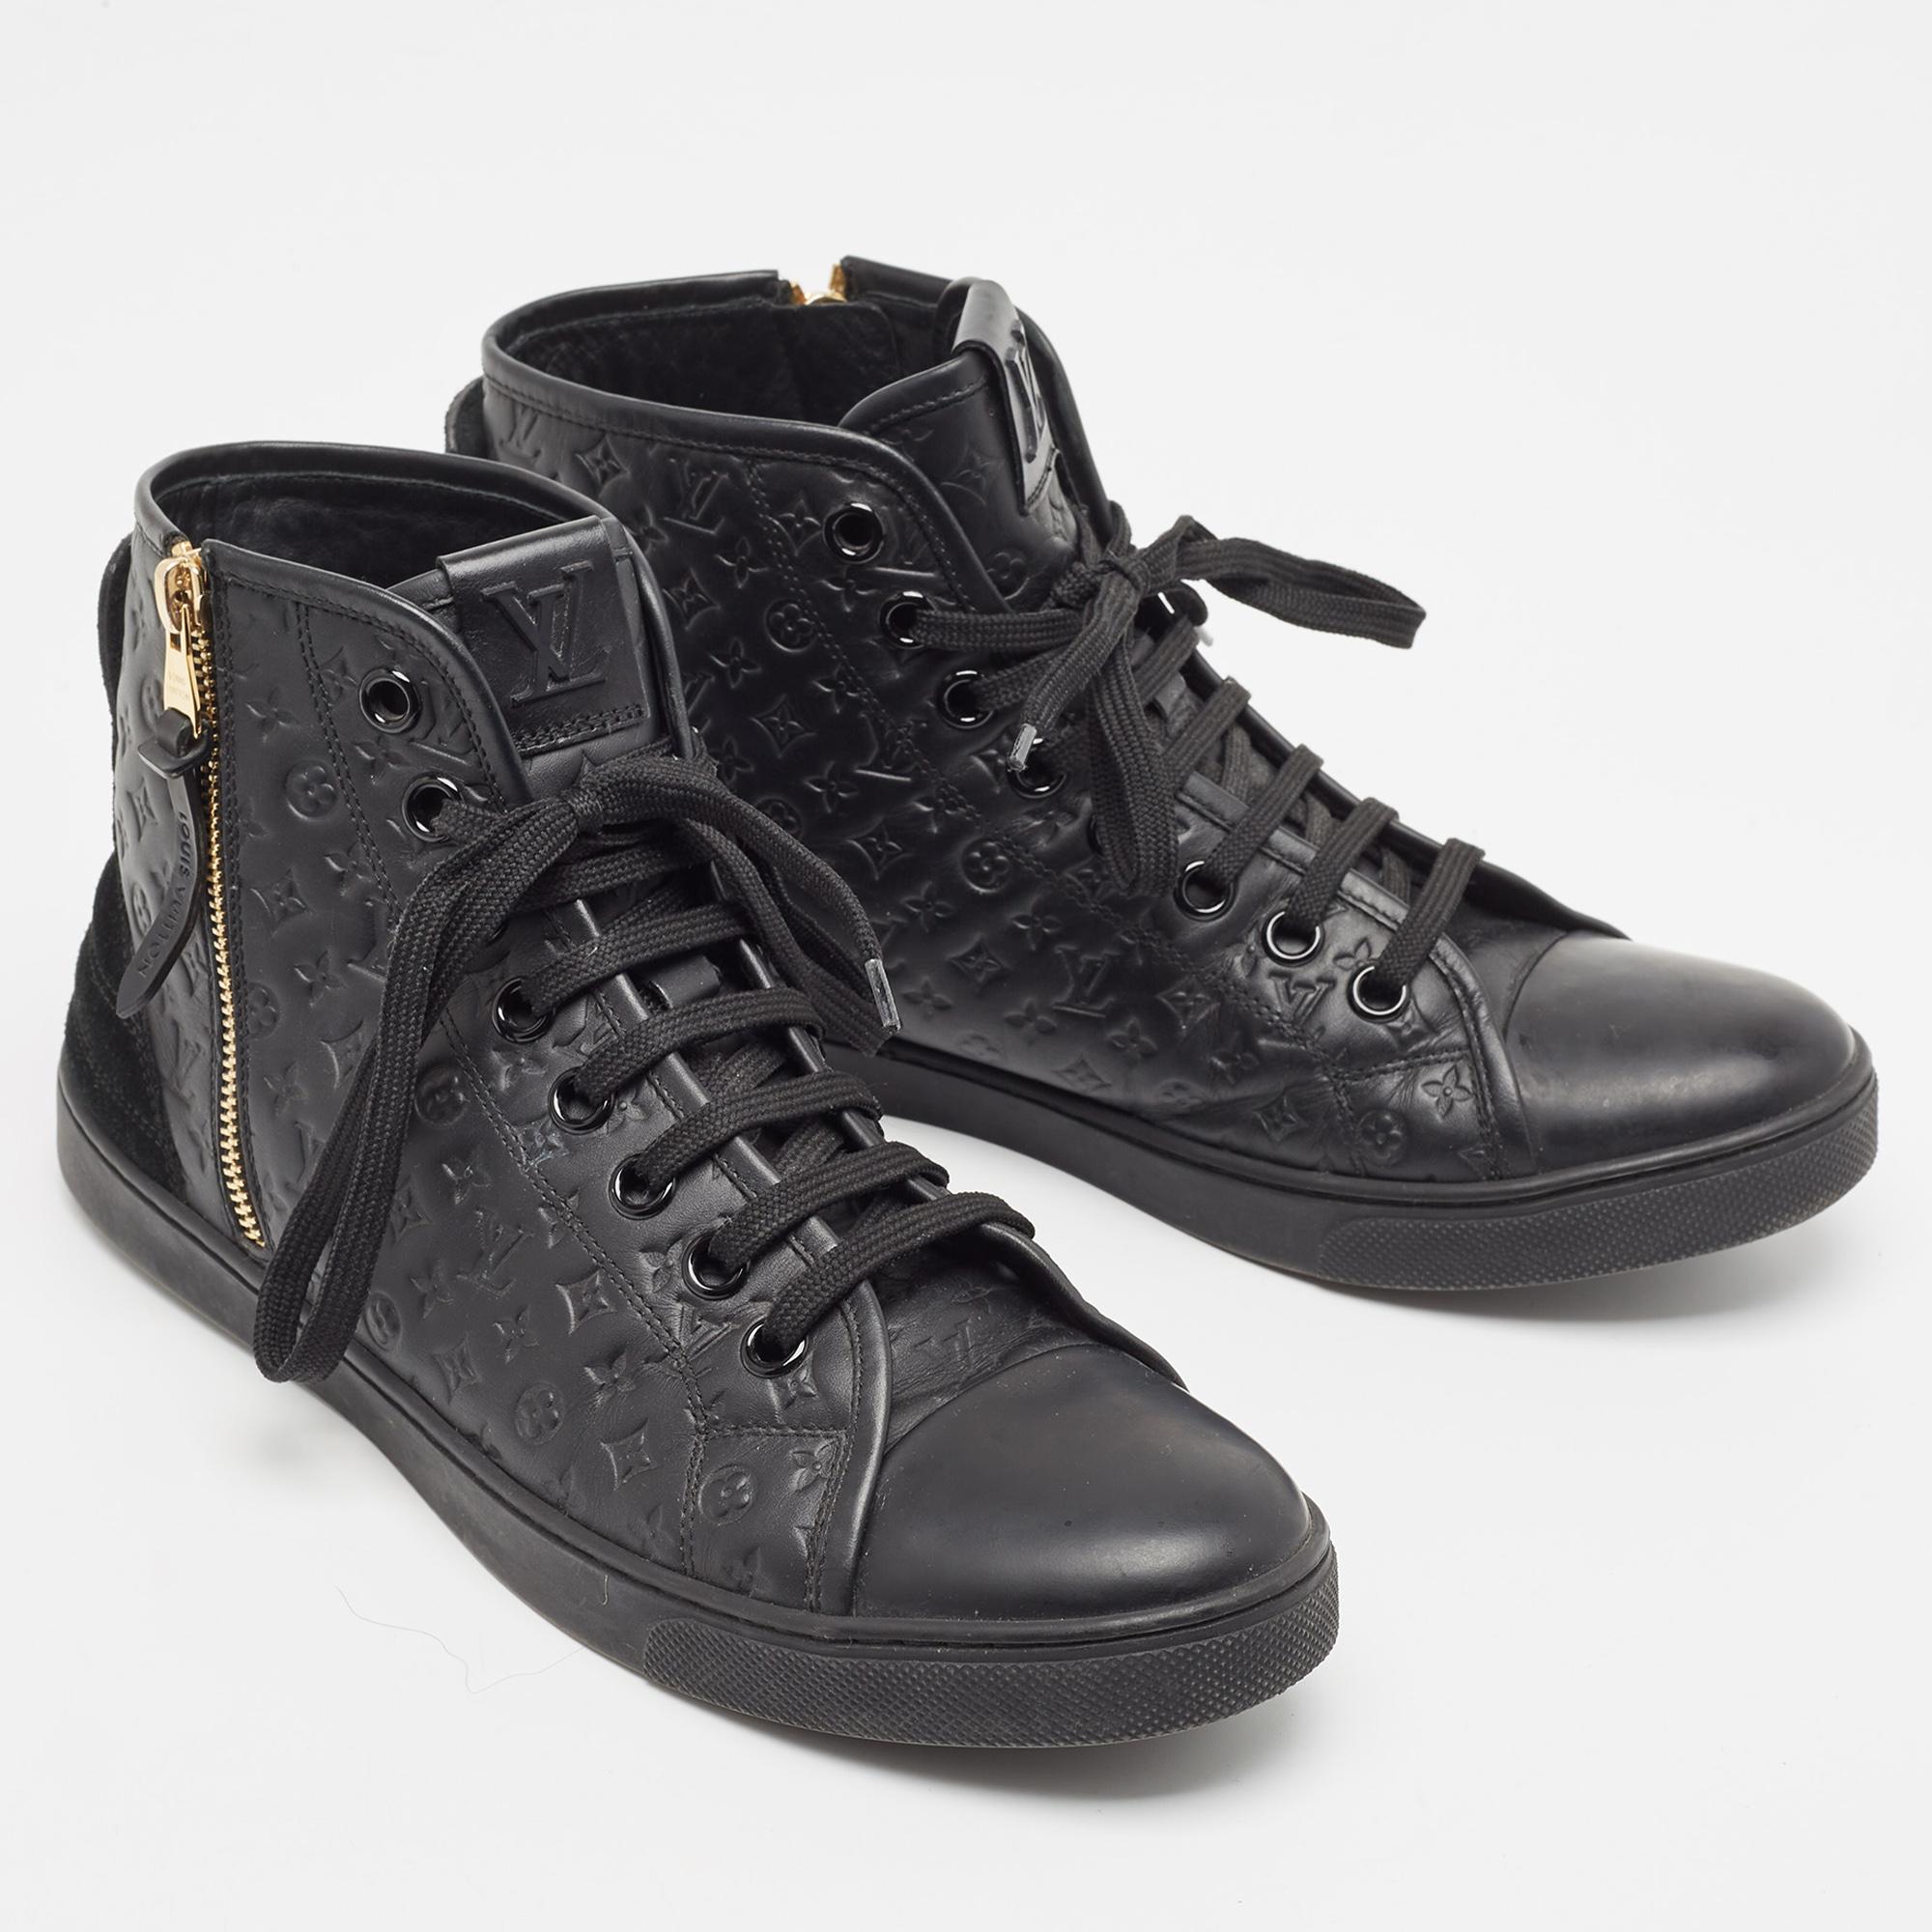 Louis Vuitton Black Leather and Suede Punchy Sneakers Size 40 In Good Condition For Sale In Dubai, Al Qouz 2